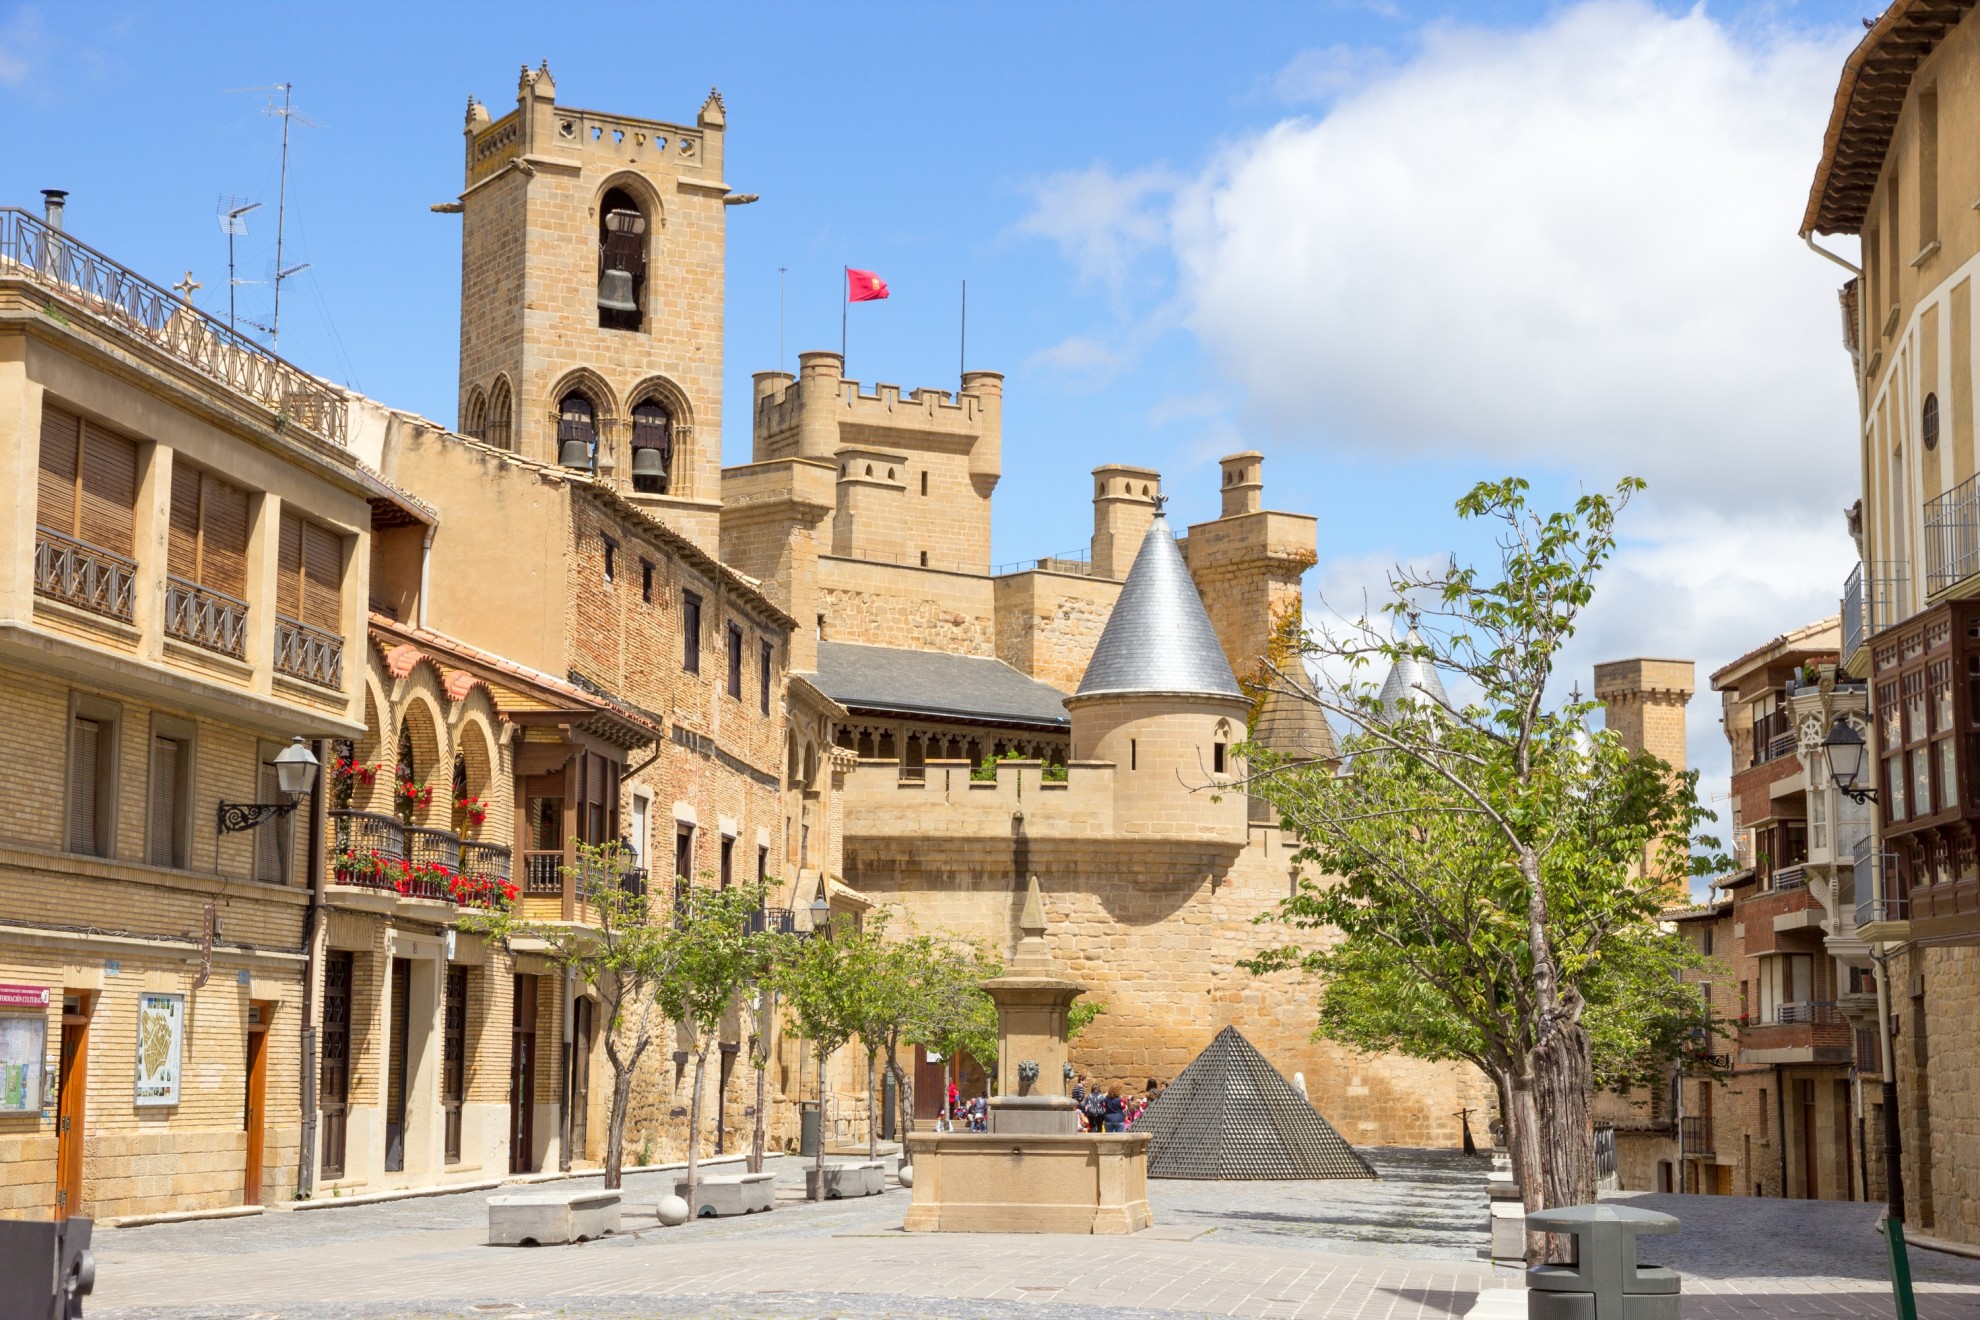 Medieval Spain car tour - View of the village of Olite